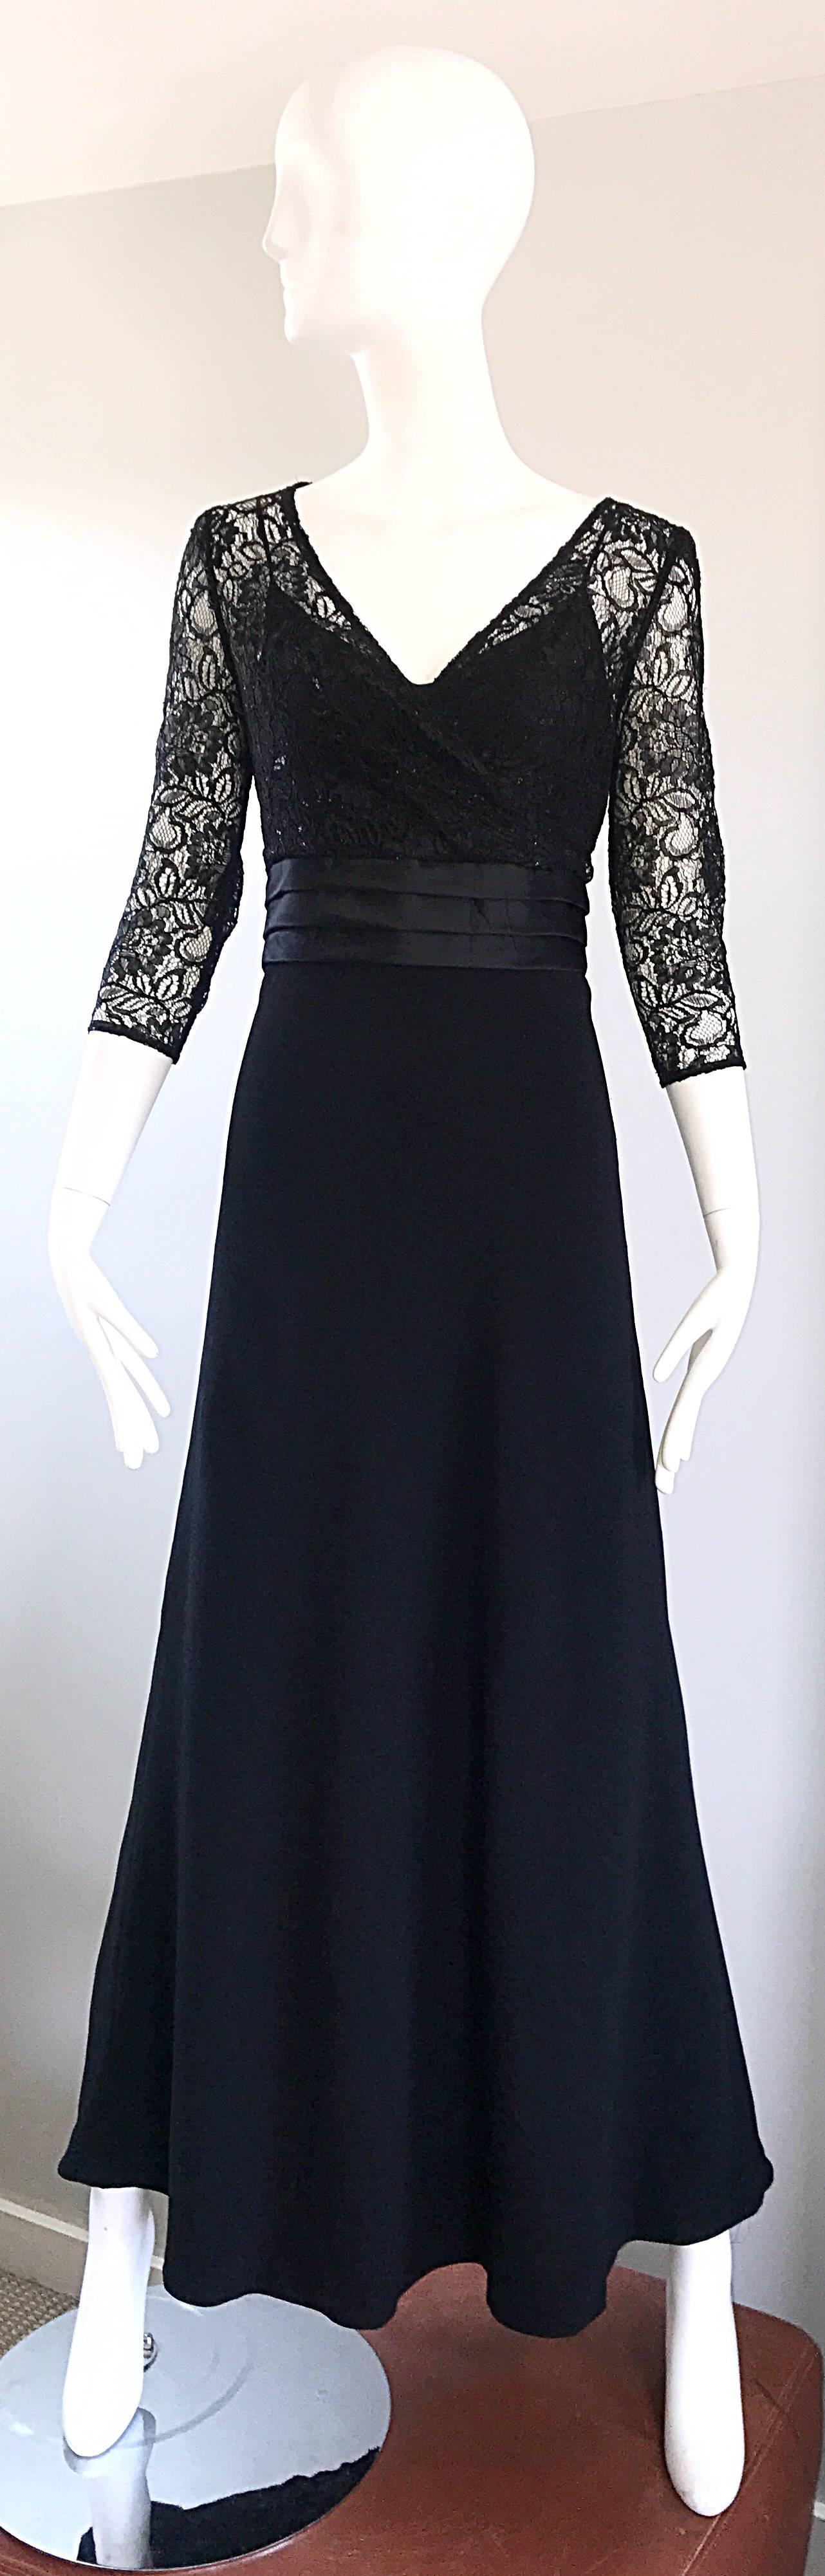 Badgley Mischka Beautiful Black Lace 3/4 Sleeves Size 8 Vintage Gown, 1990s   For Sale 2